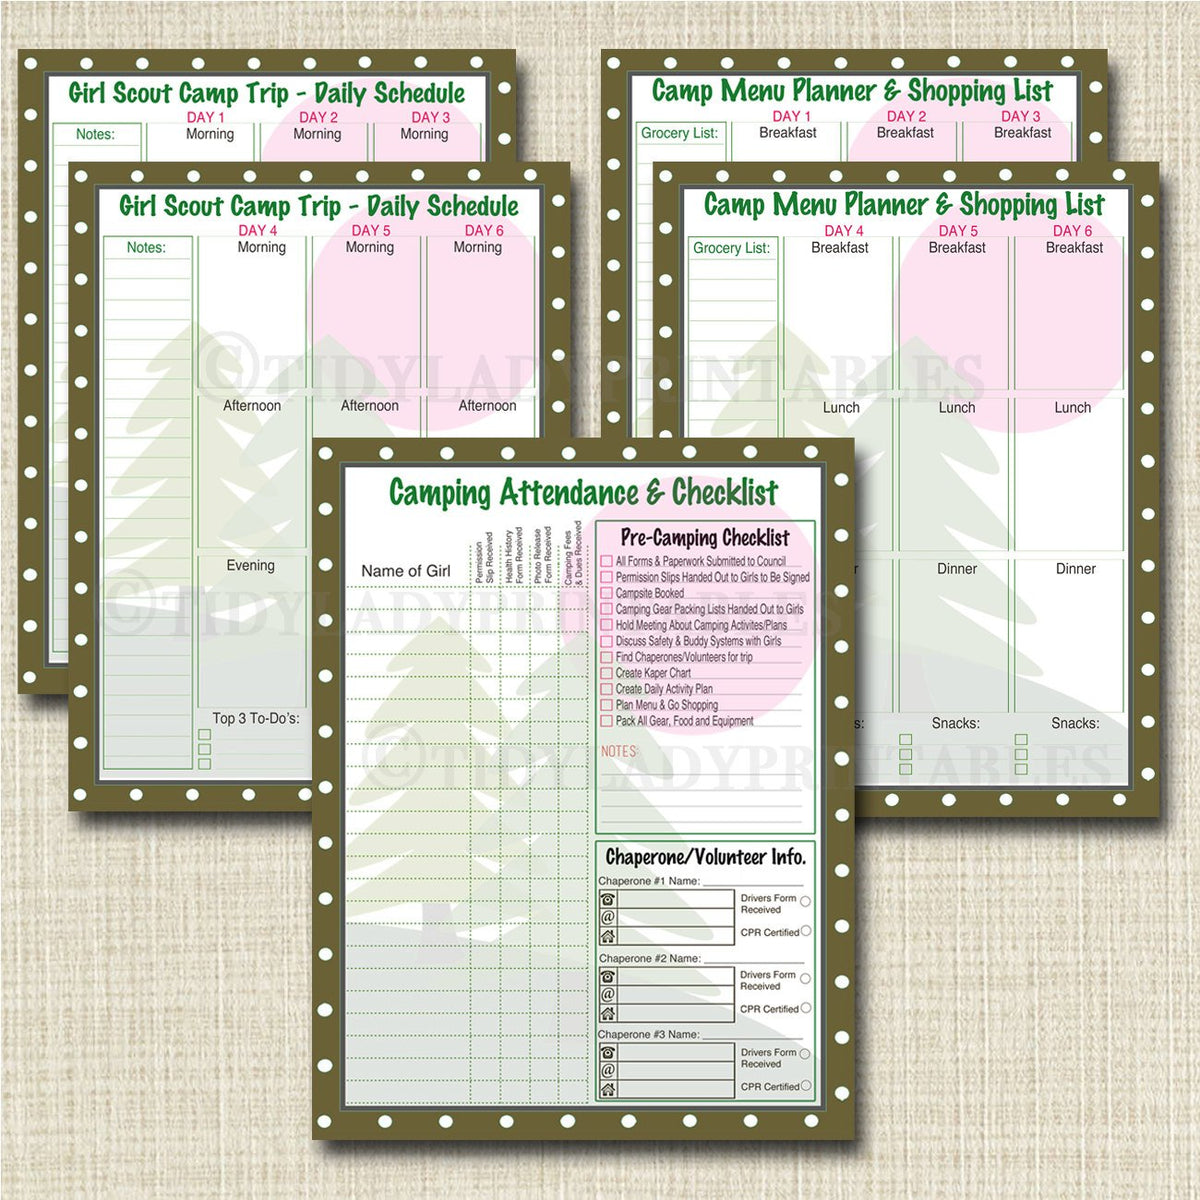 boy scout meal planning sheet